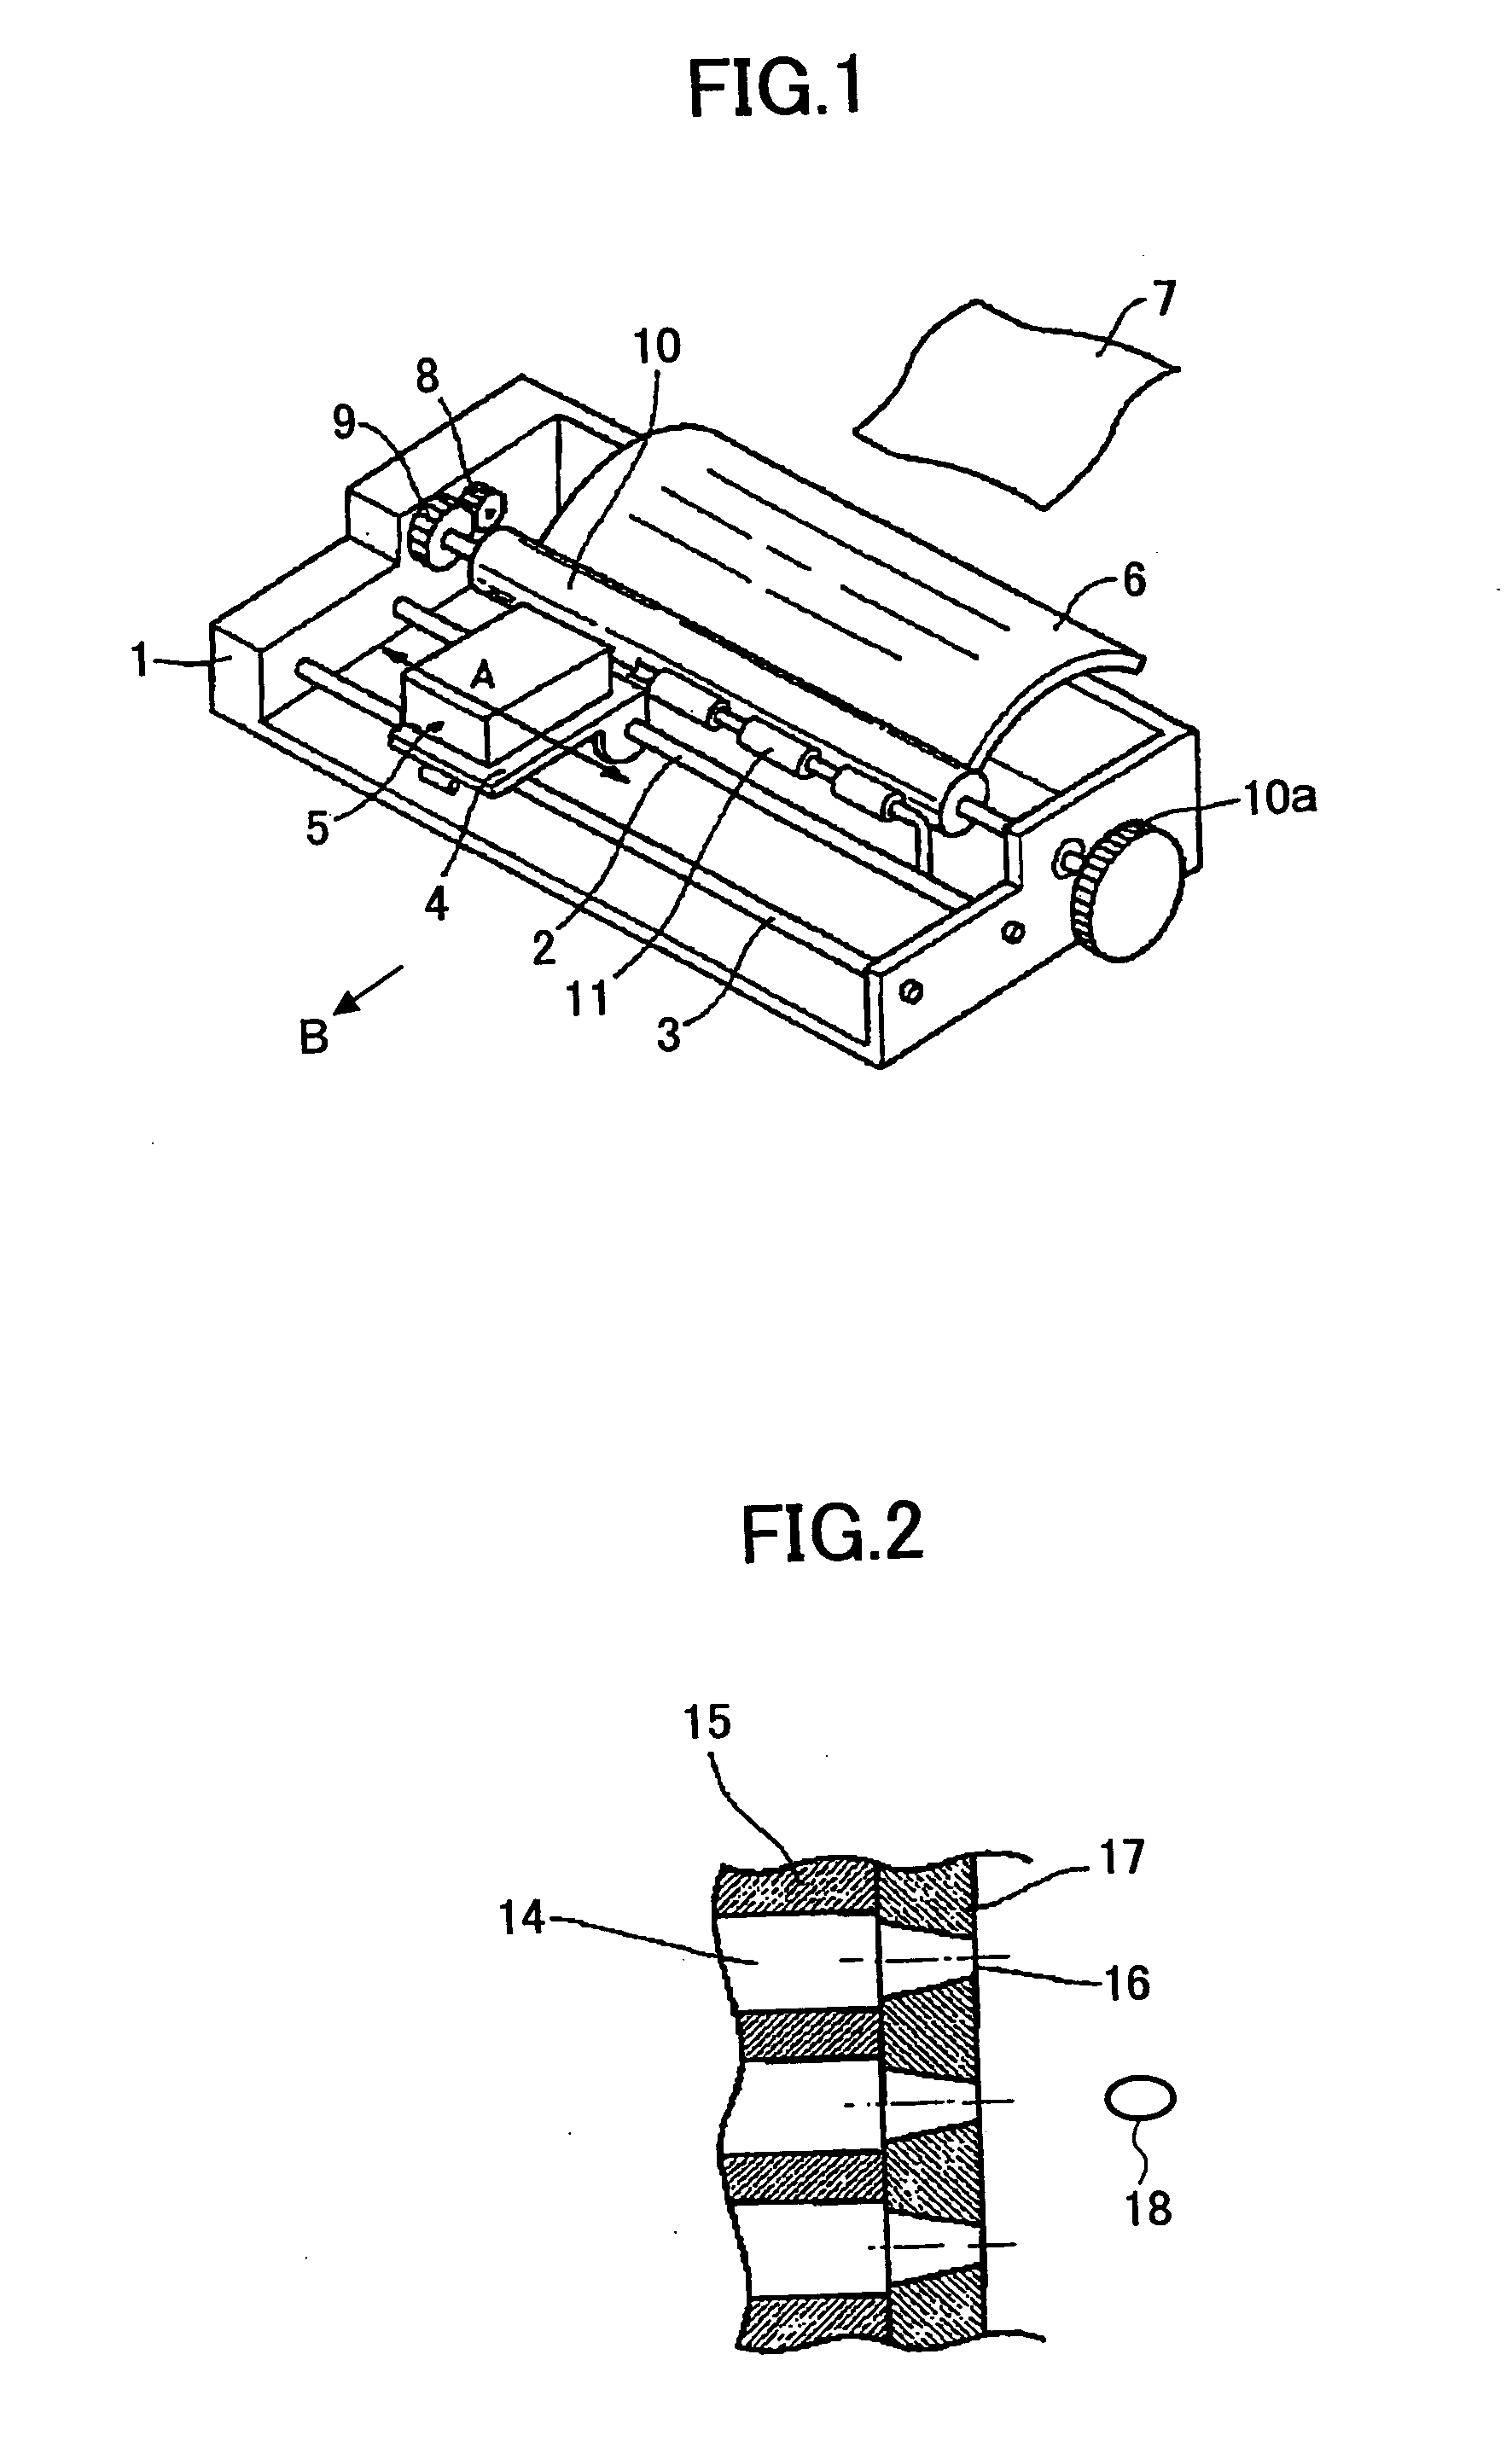 Image-processing method and apparatus, and image-forming apparatus